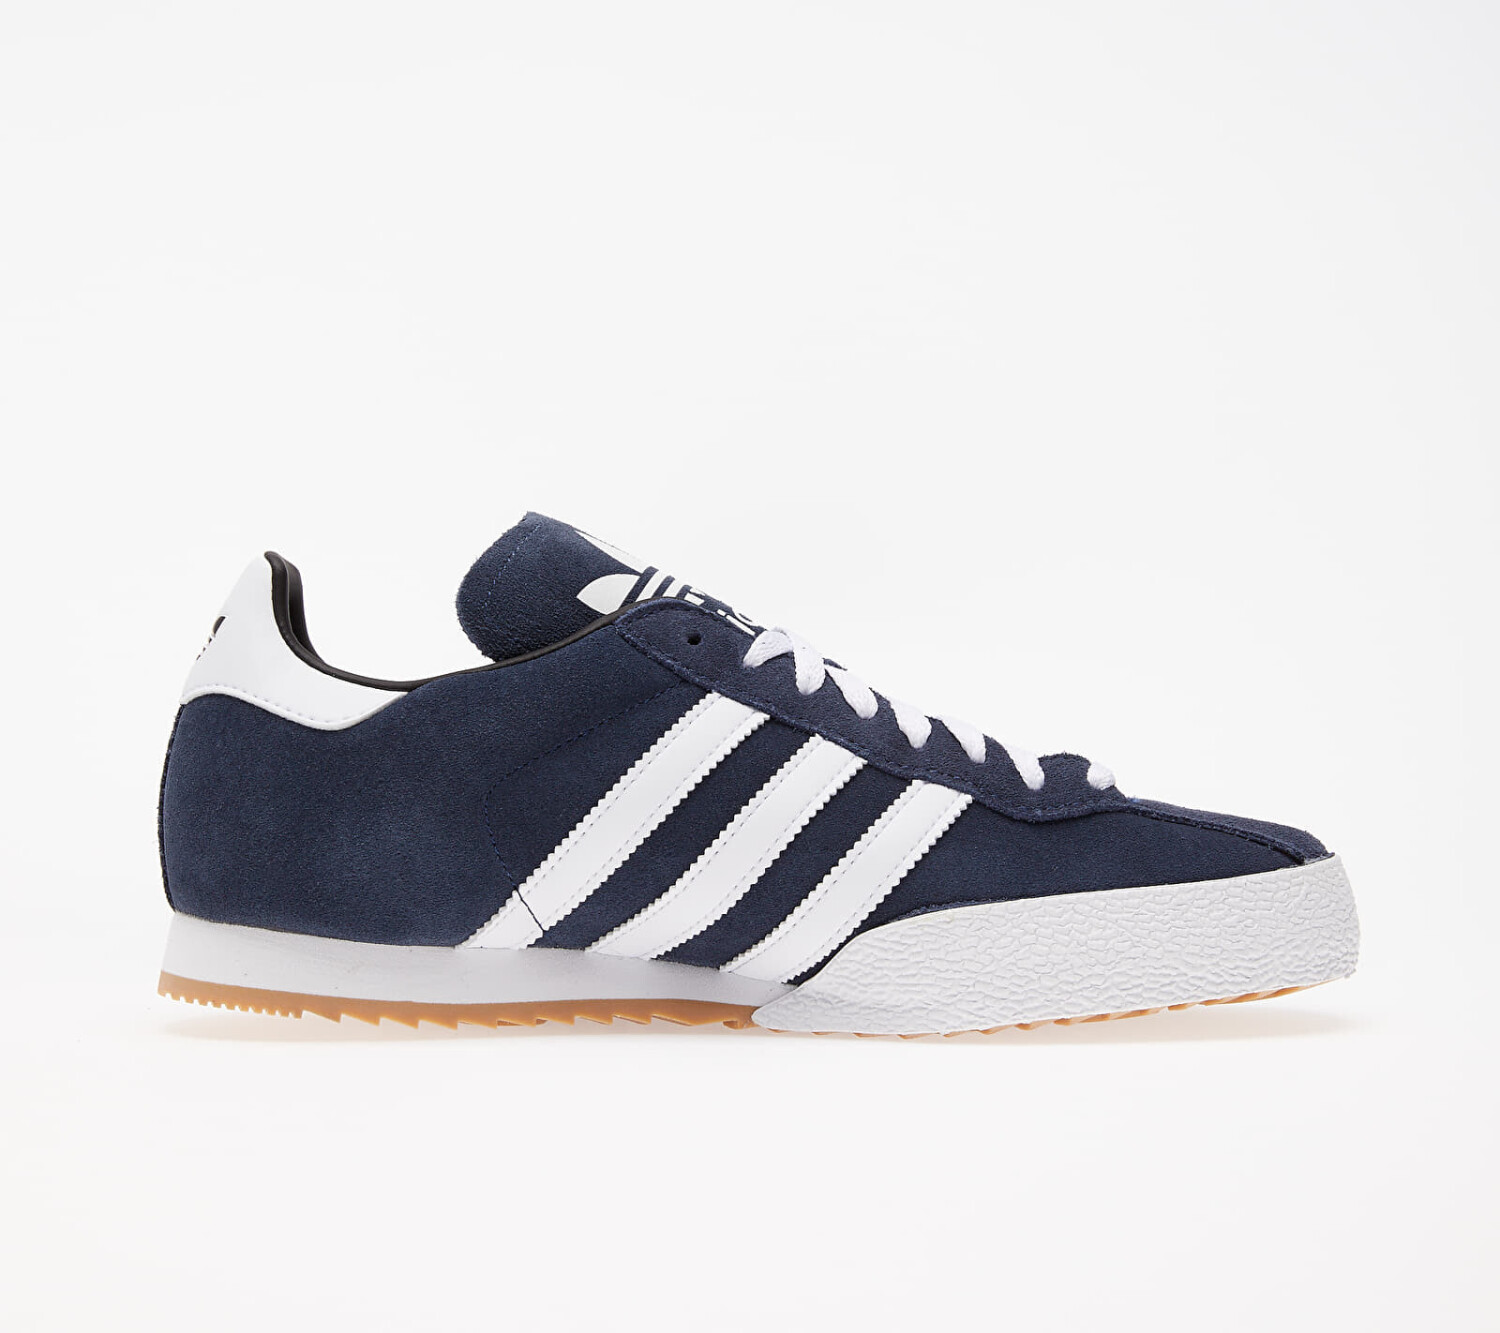 Buy Adidas Samba Super Suede blue/white (019332) from £48.00 (Today ...